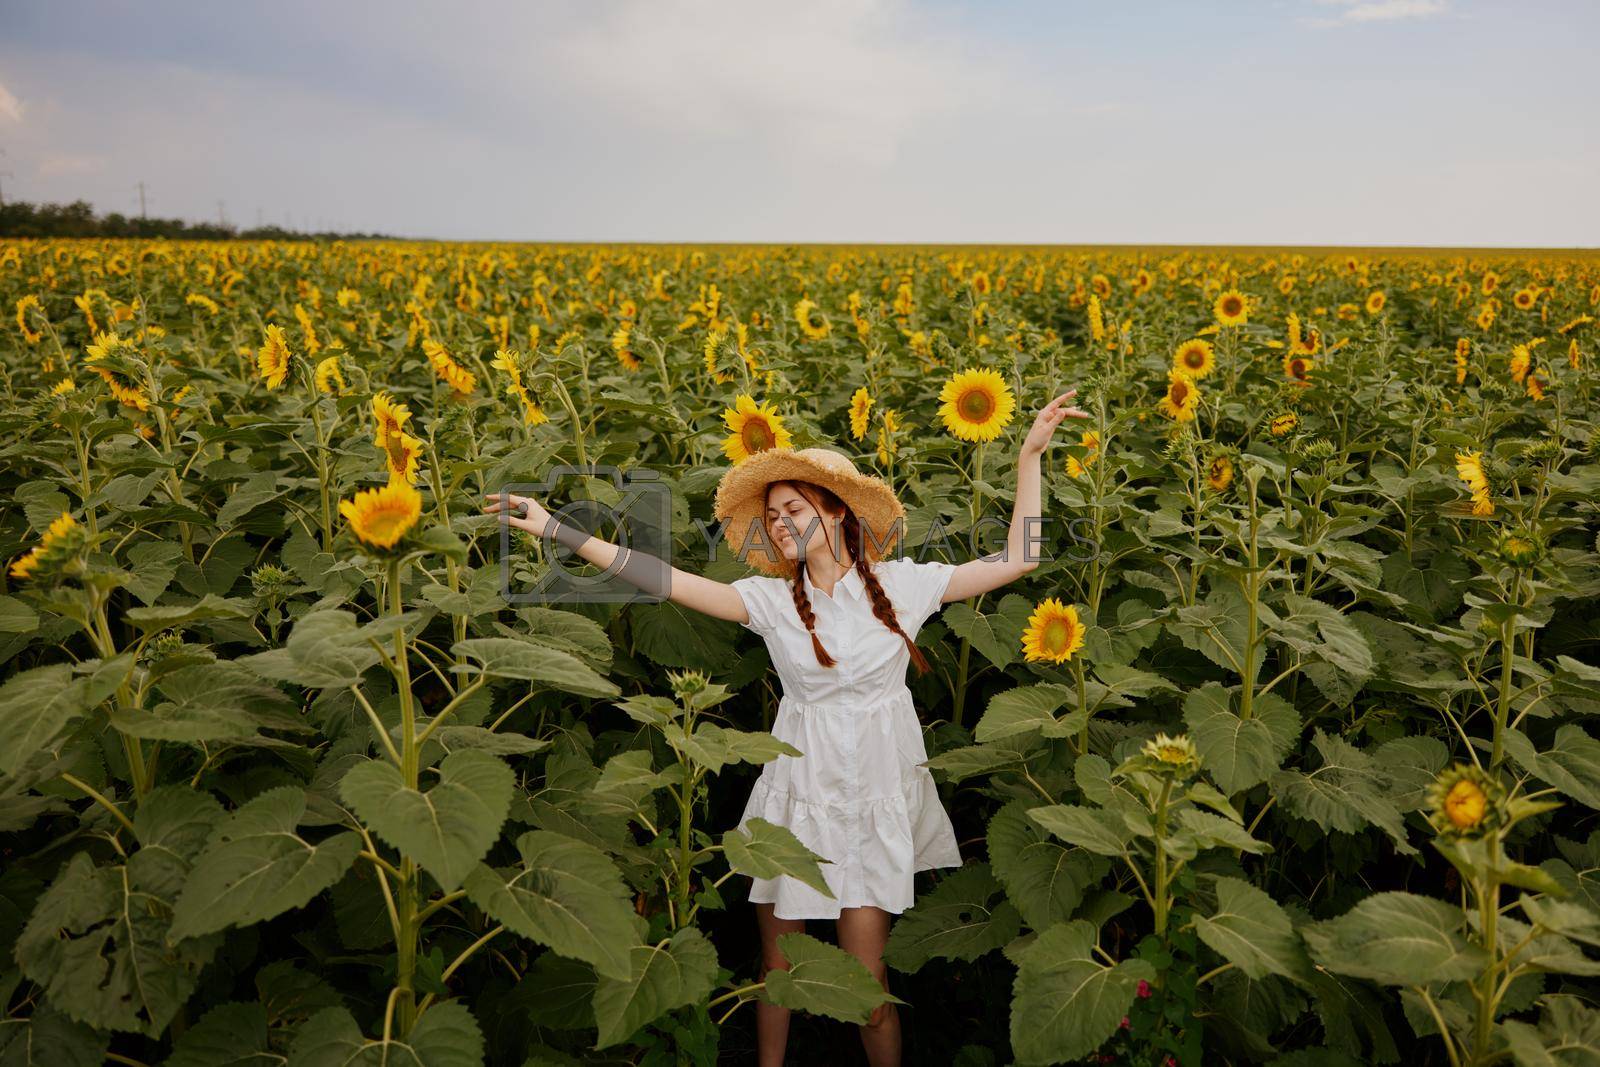 woman portrait In a field with blooming sunflowers countryside. High quality photo